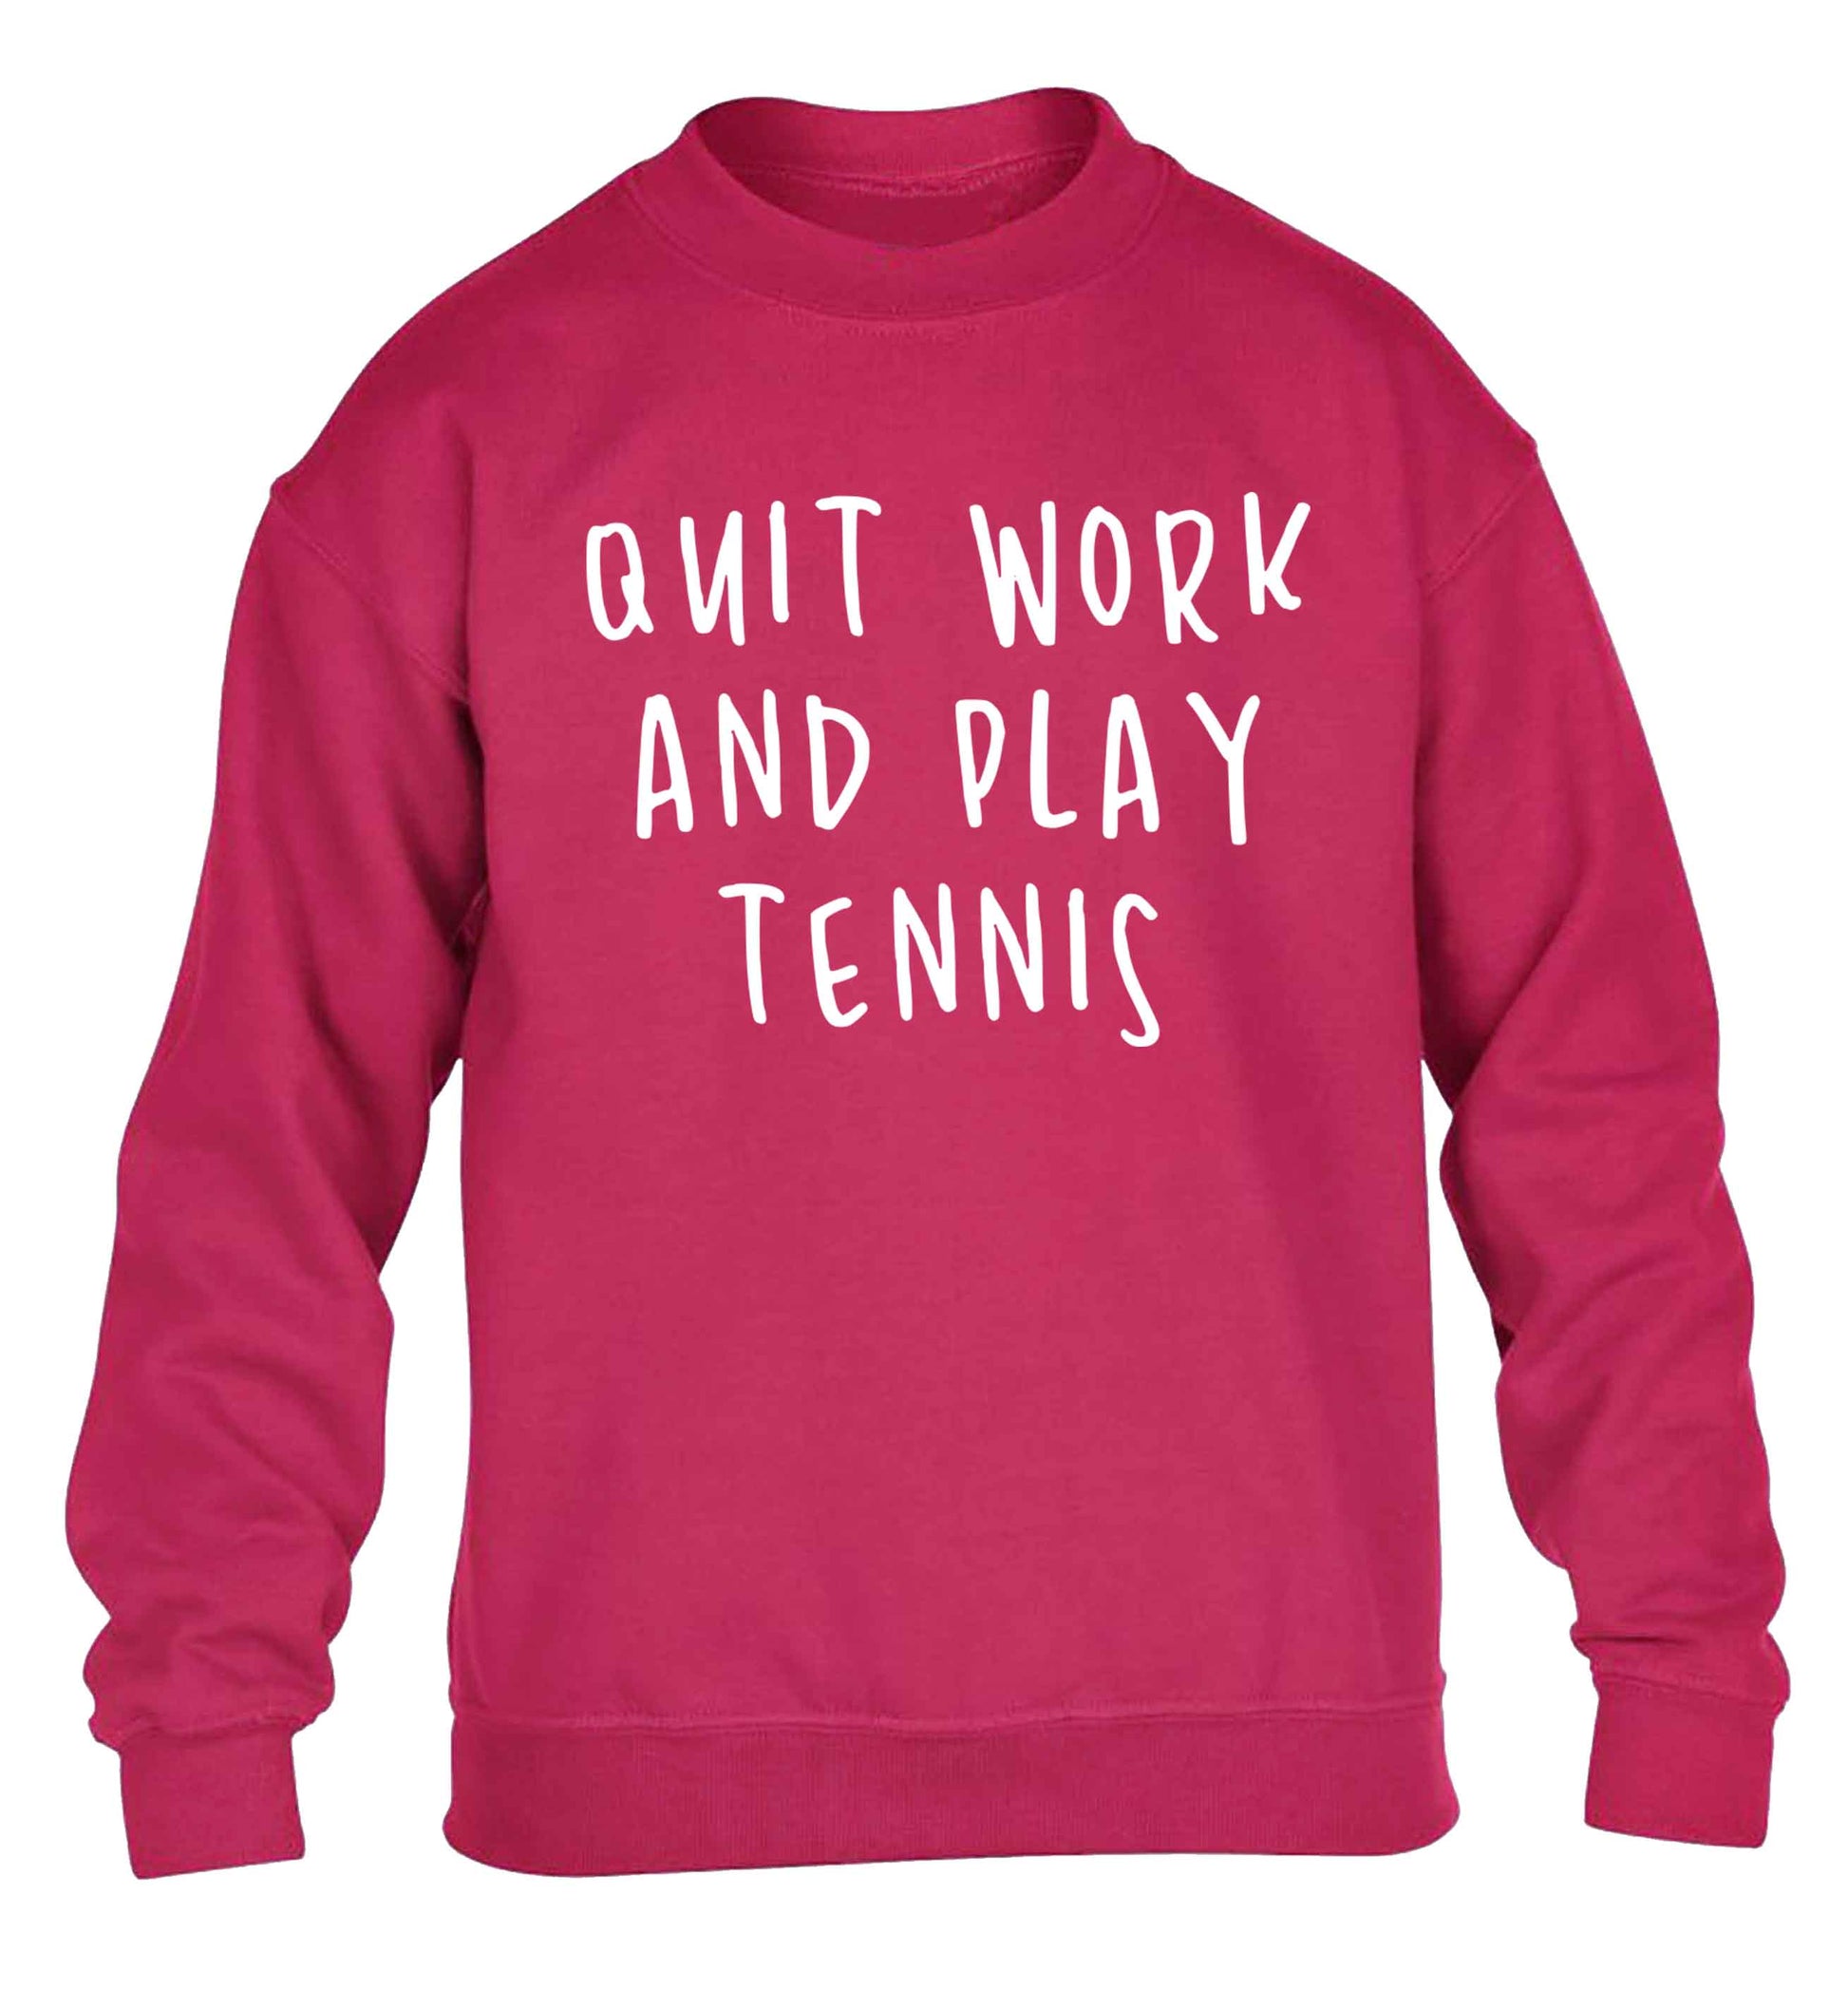 Quit work and play tennis children's pink sweater 12-13 Years